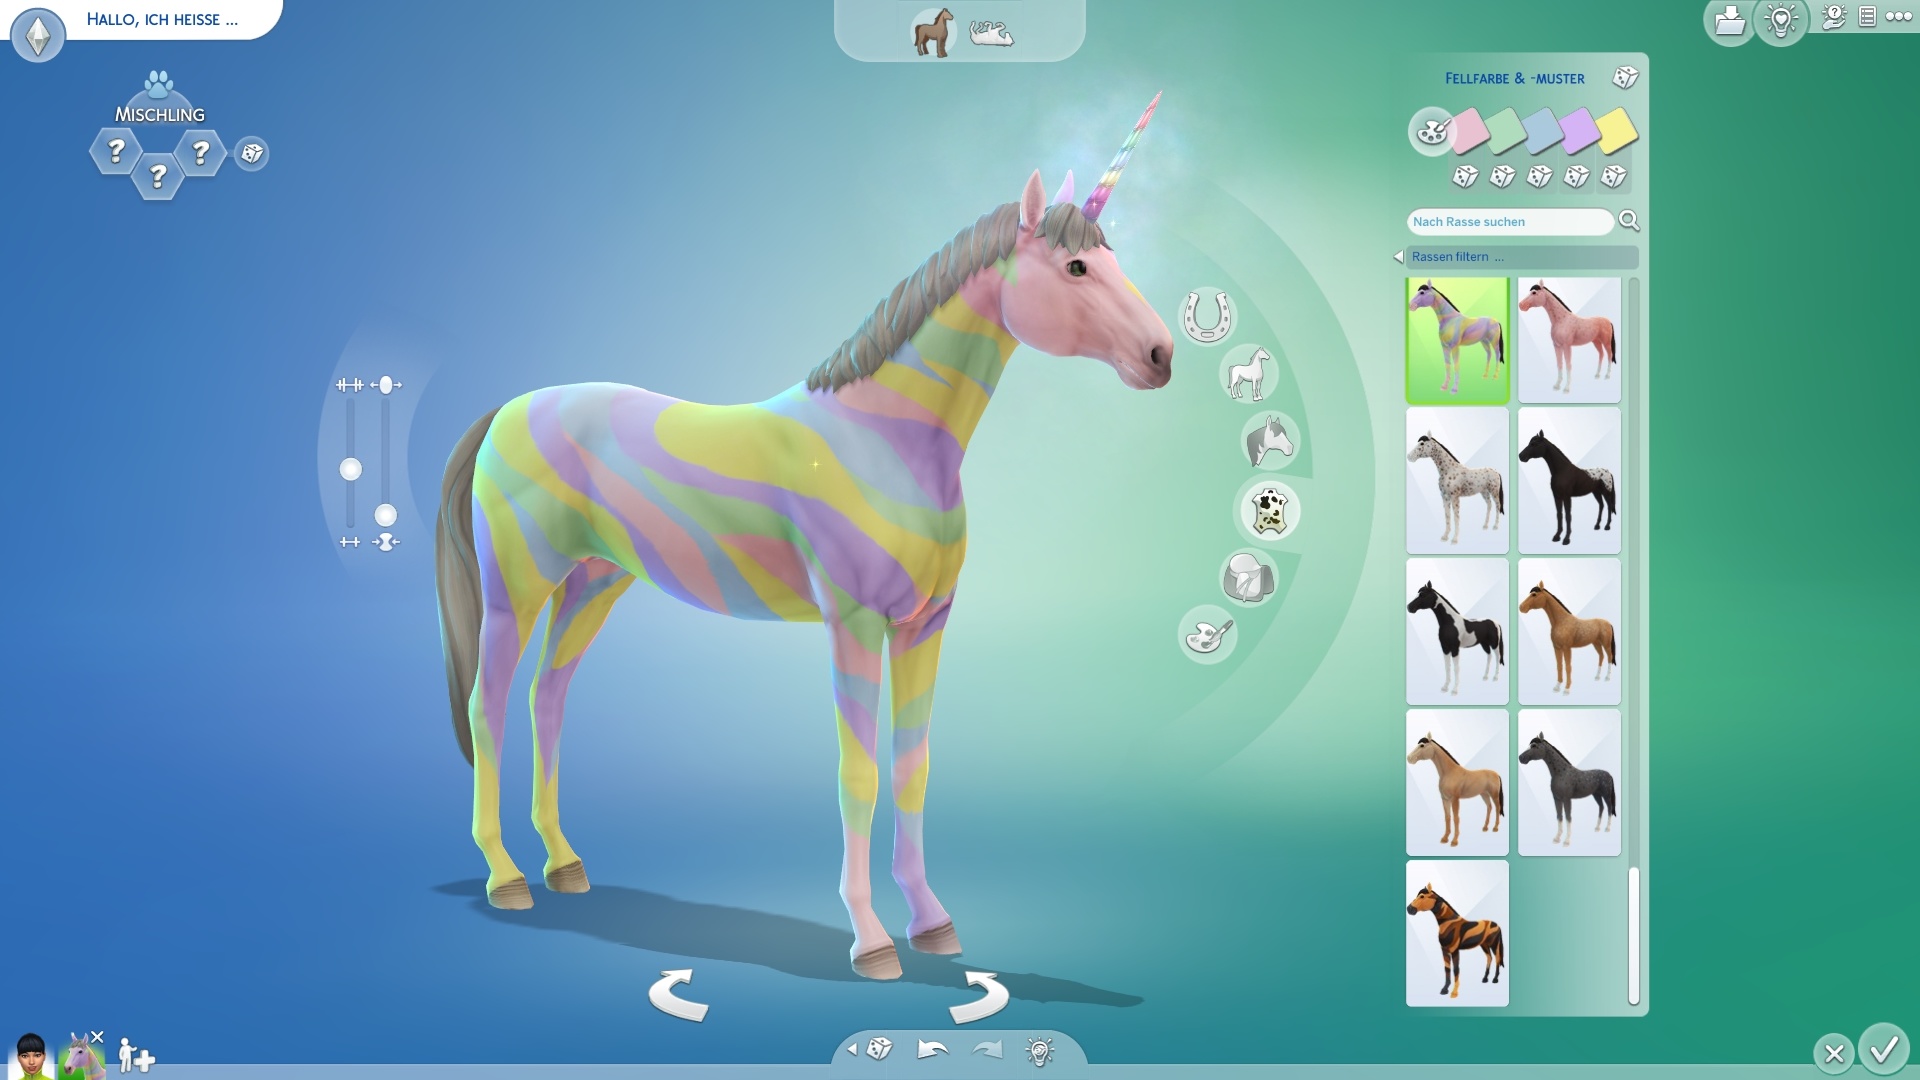 (If there are no unicorns in the game, we'll just have to build them ourselves!)